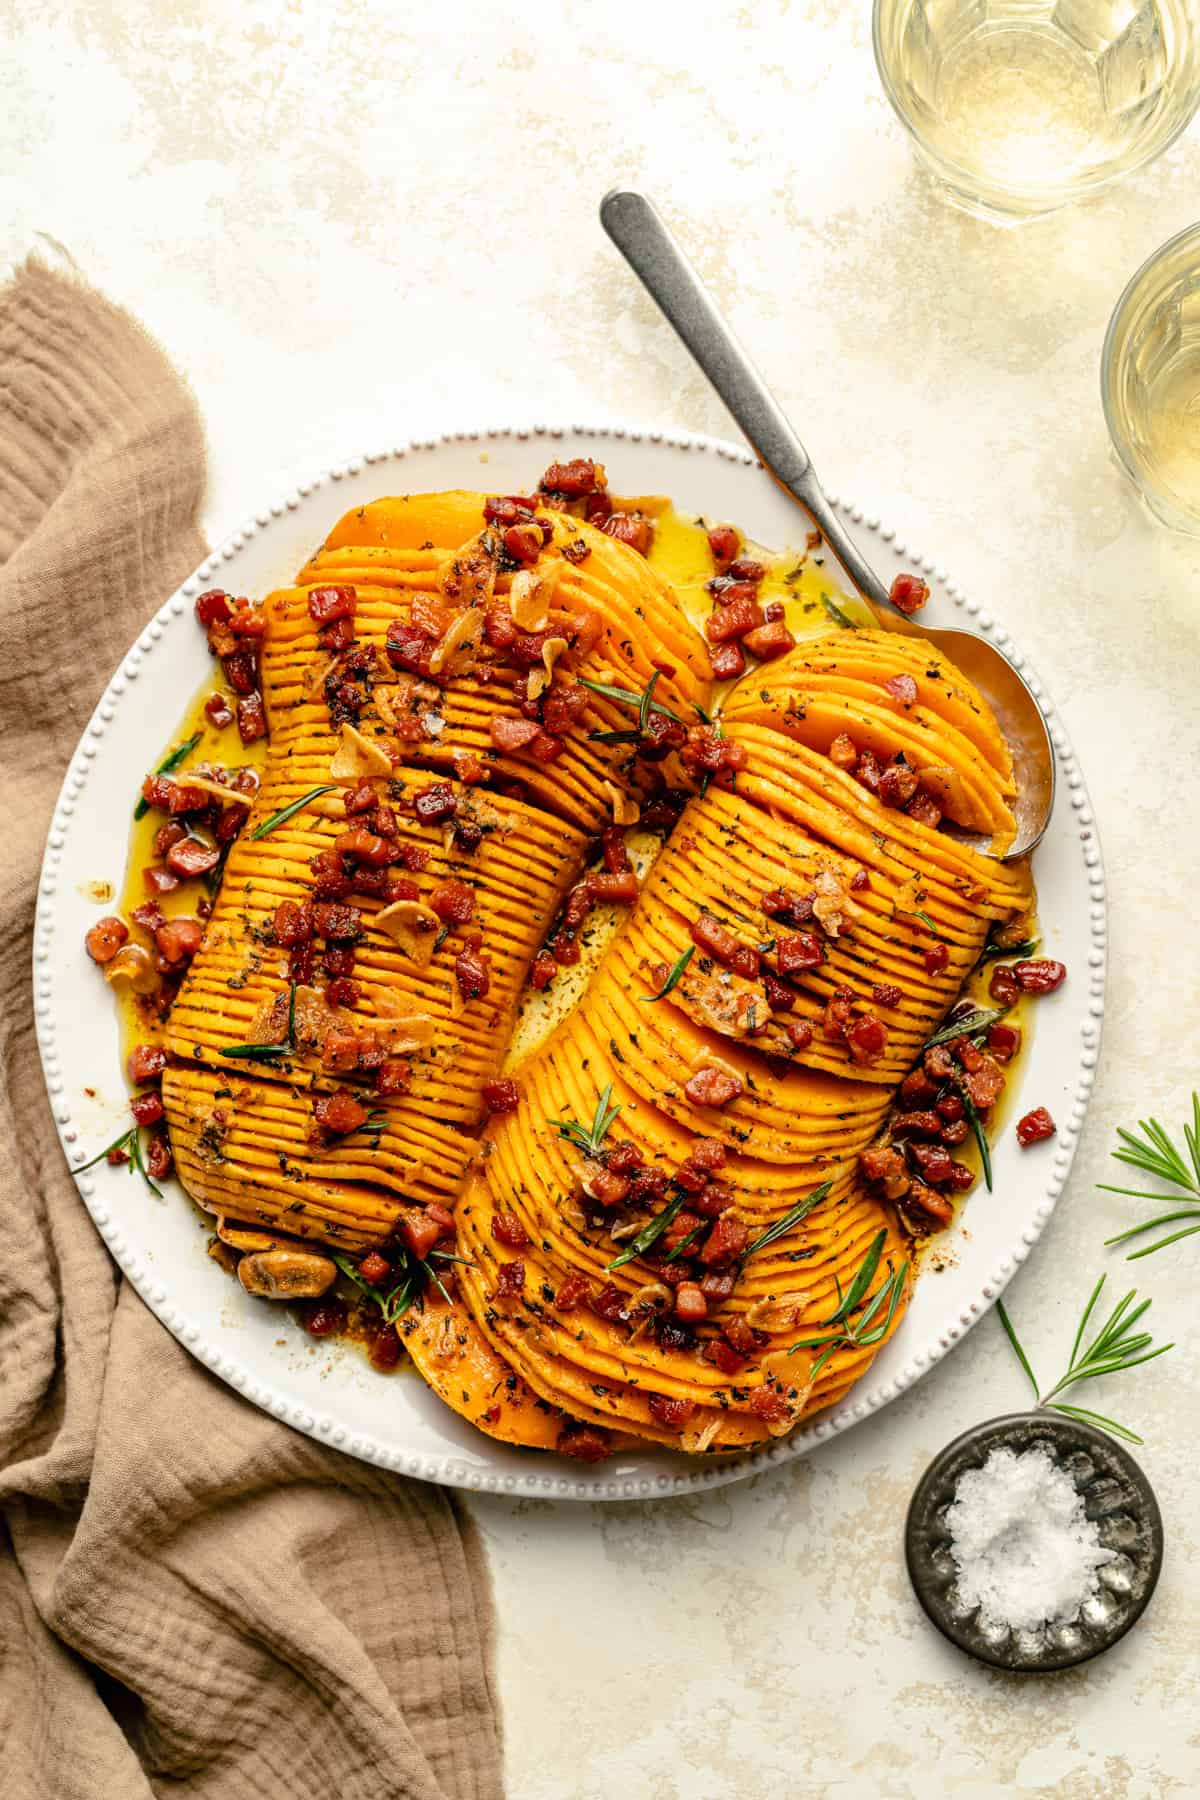 Hasselback butternut squash with bacon and brown butter served on a platter with a spoon and rosemary garnish.